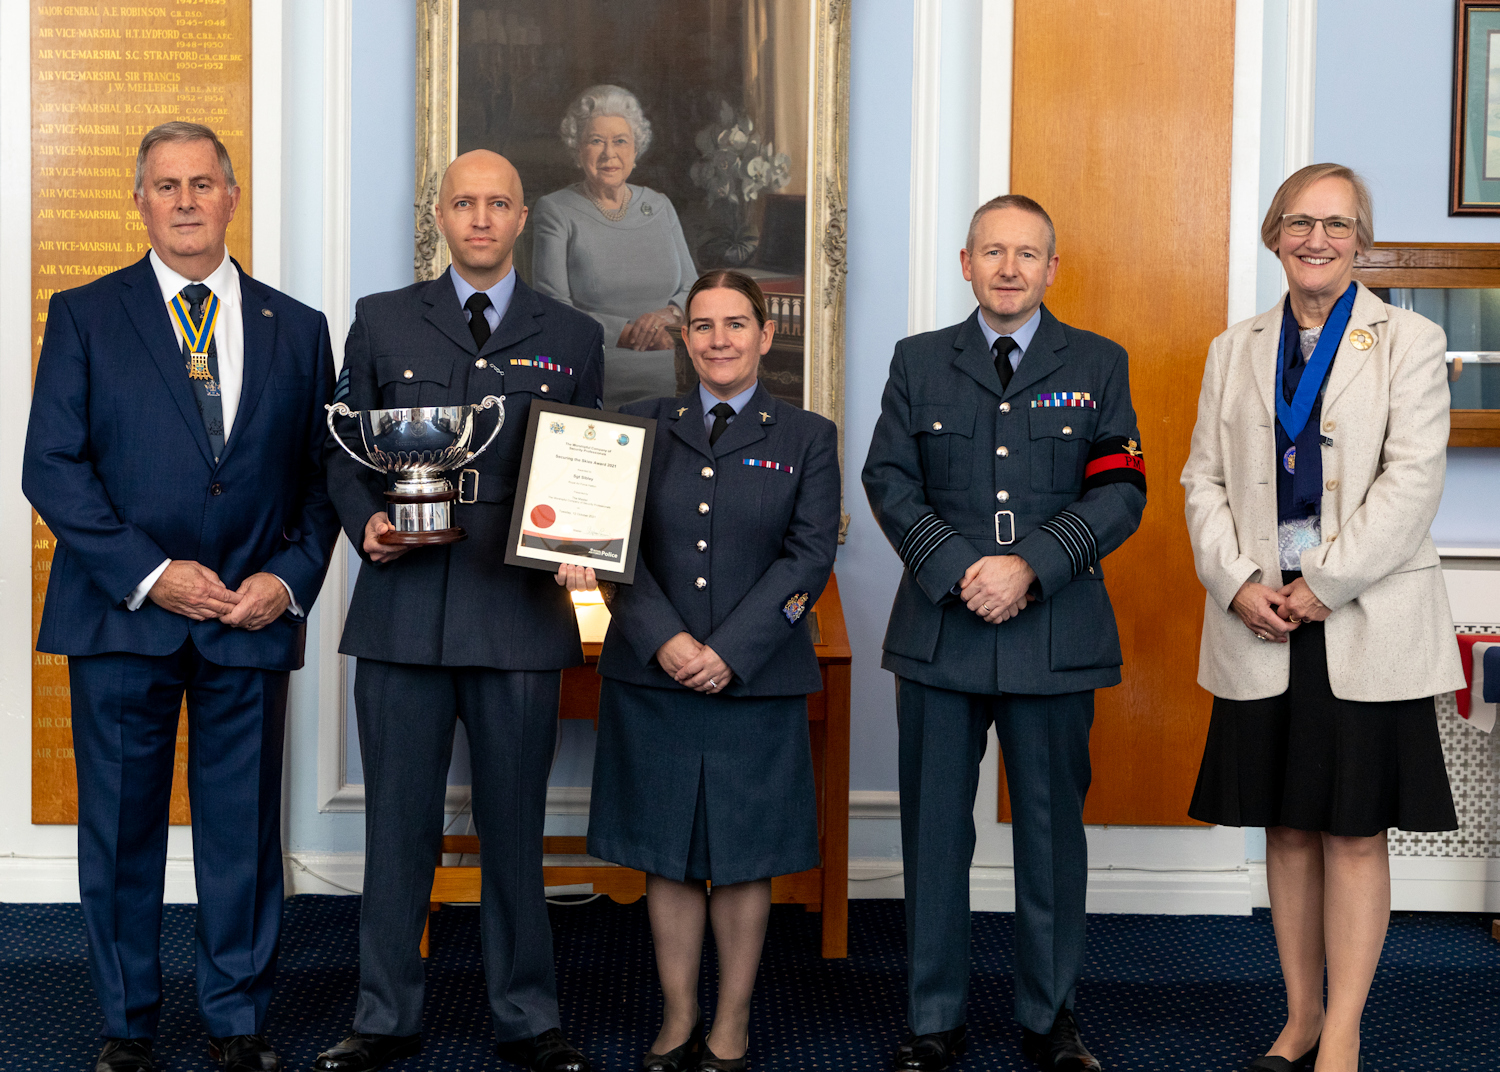 The award was presented to Sergeant Sibley by Acting Force Commander and Provost Marshal Group Captain Wilkinson, and members of WCoSP for his outstanding professionalism, dedication, and high-quality output in support of protective security effects across six UK Defence establishments